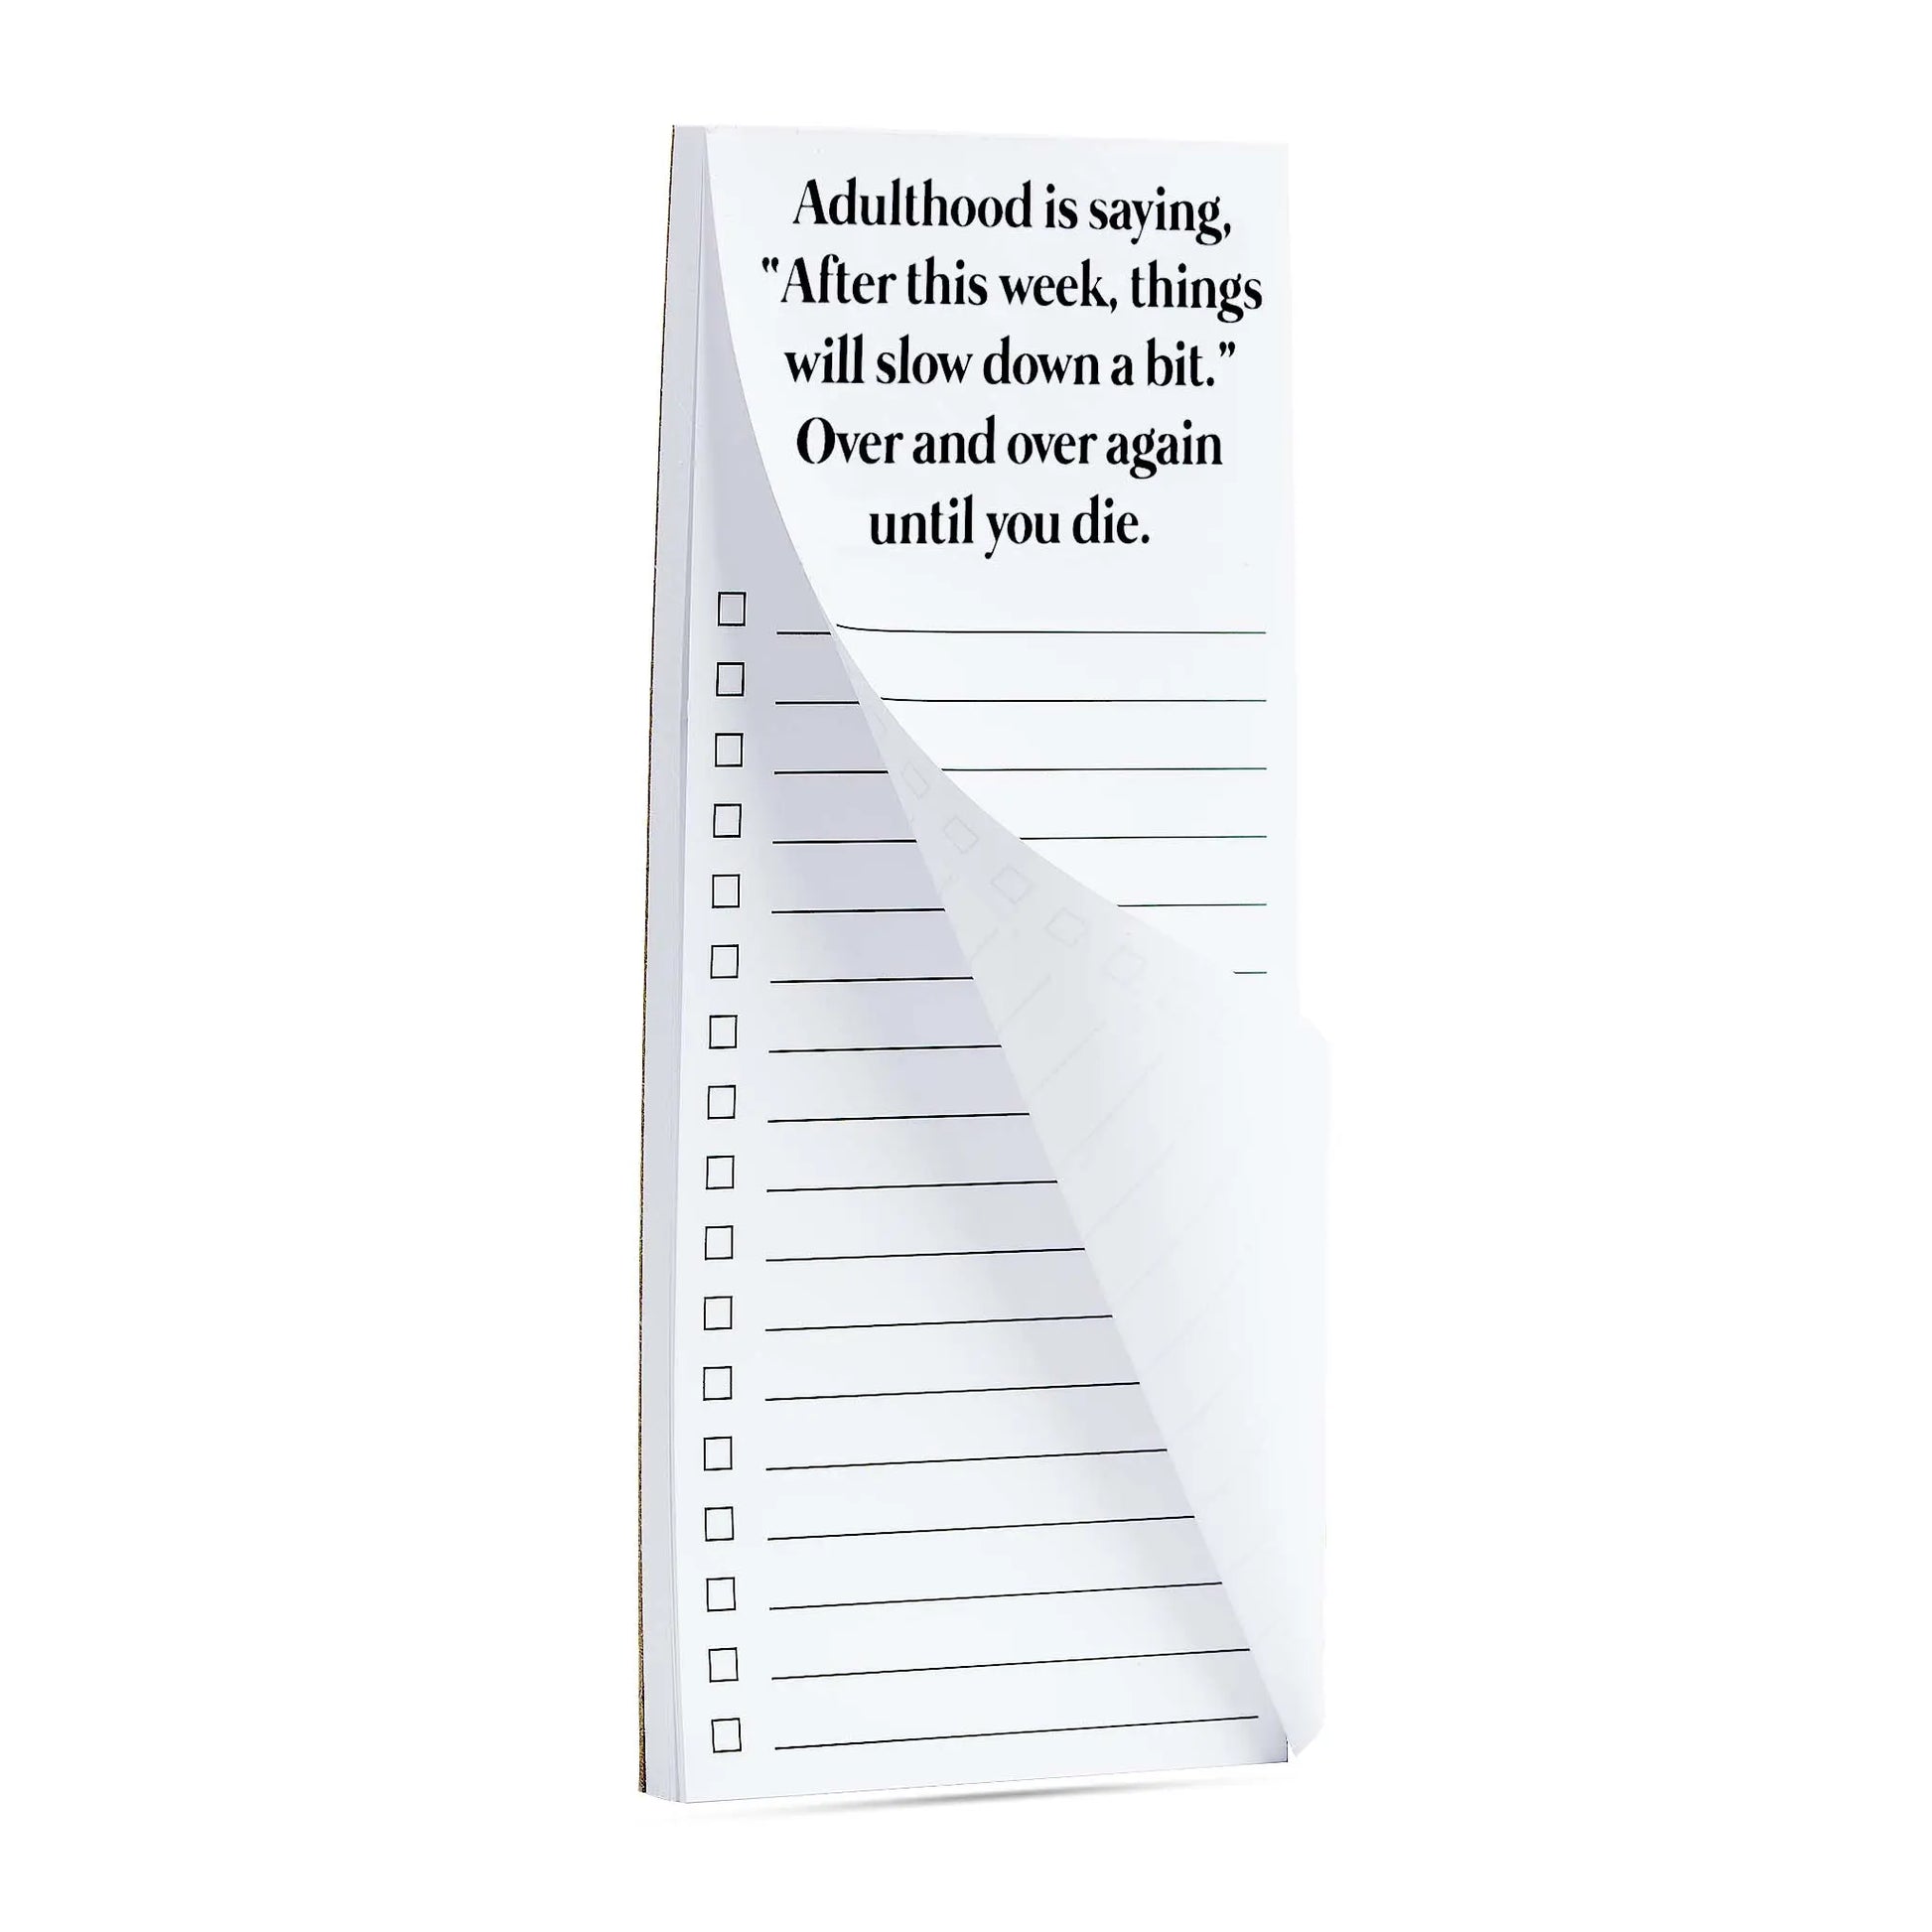 Adulthood is saying things will slow down funny list pad ellembee gift